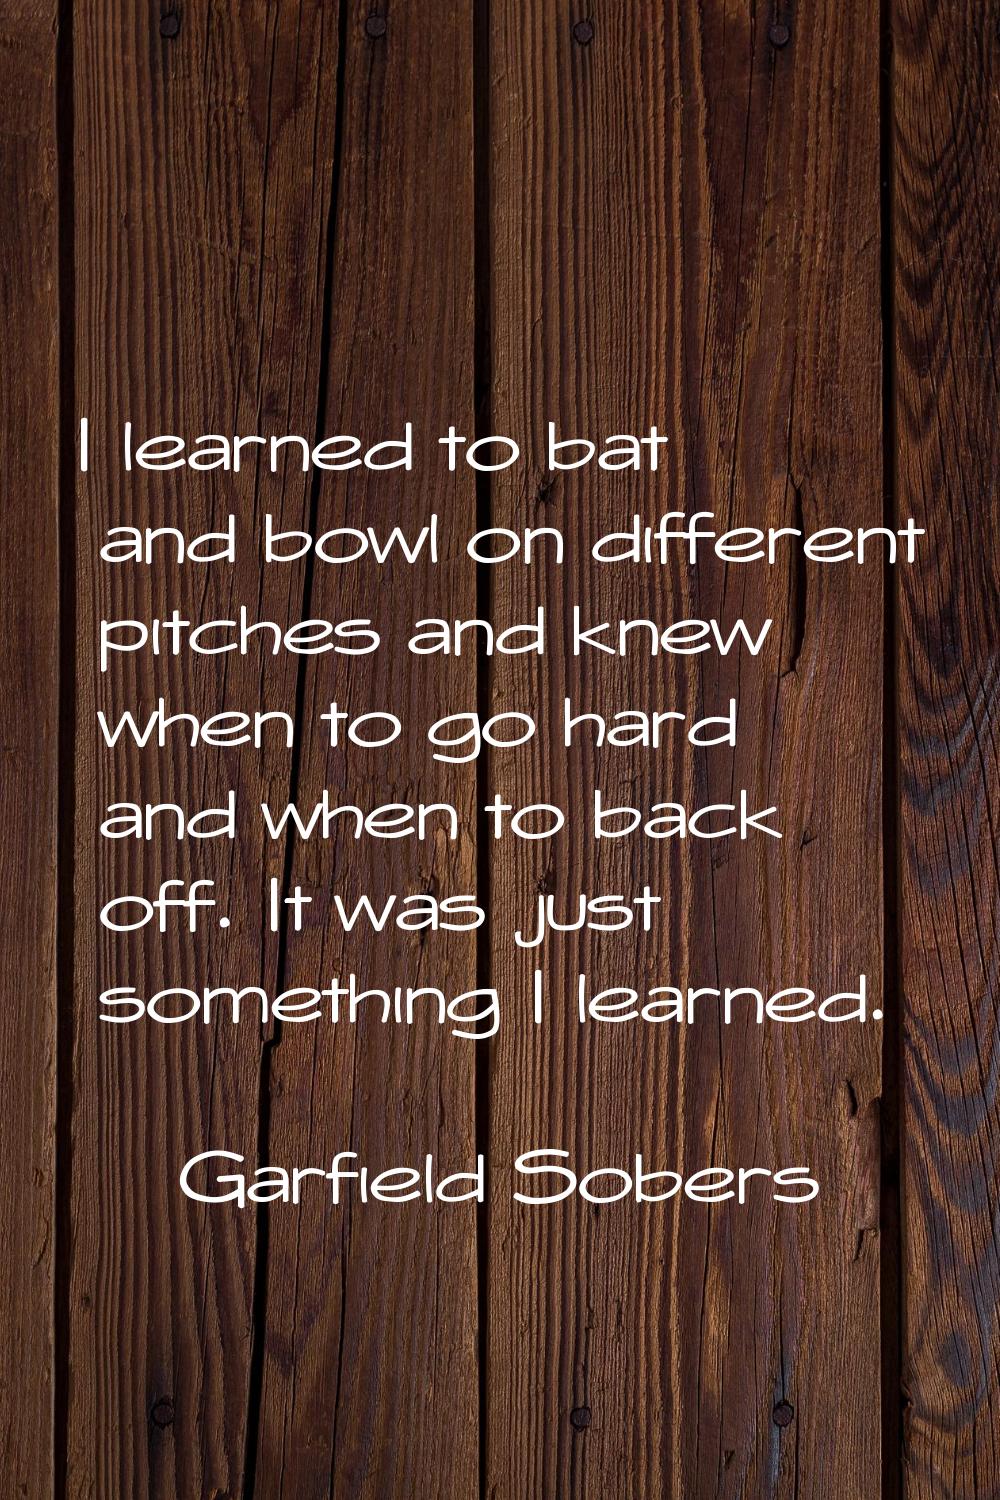 I learned to bat and bowl on different pitches and knew when to go hard and when to back off. It wa